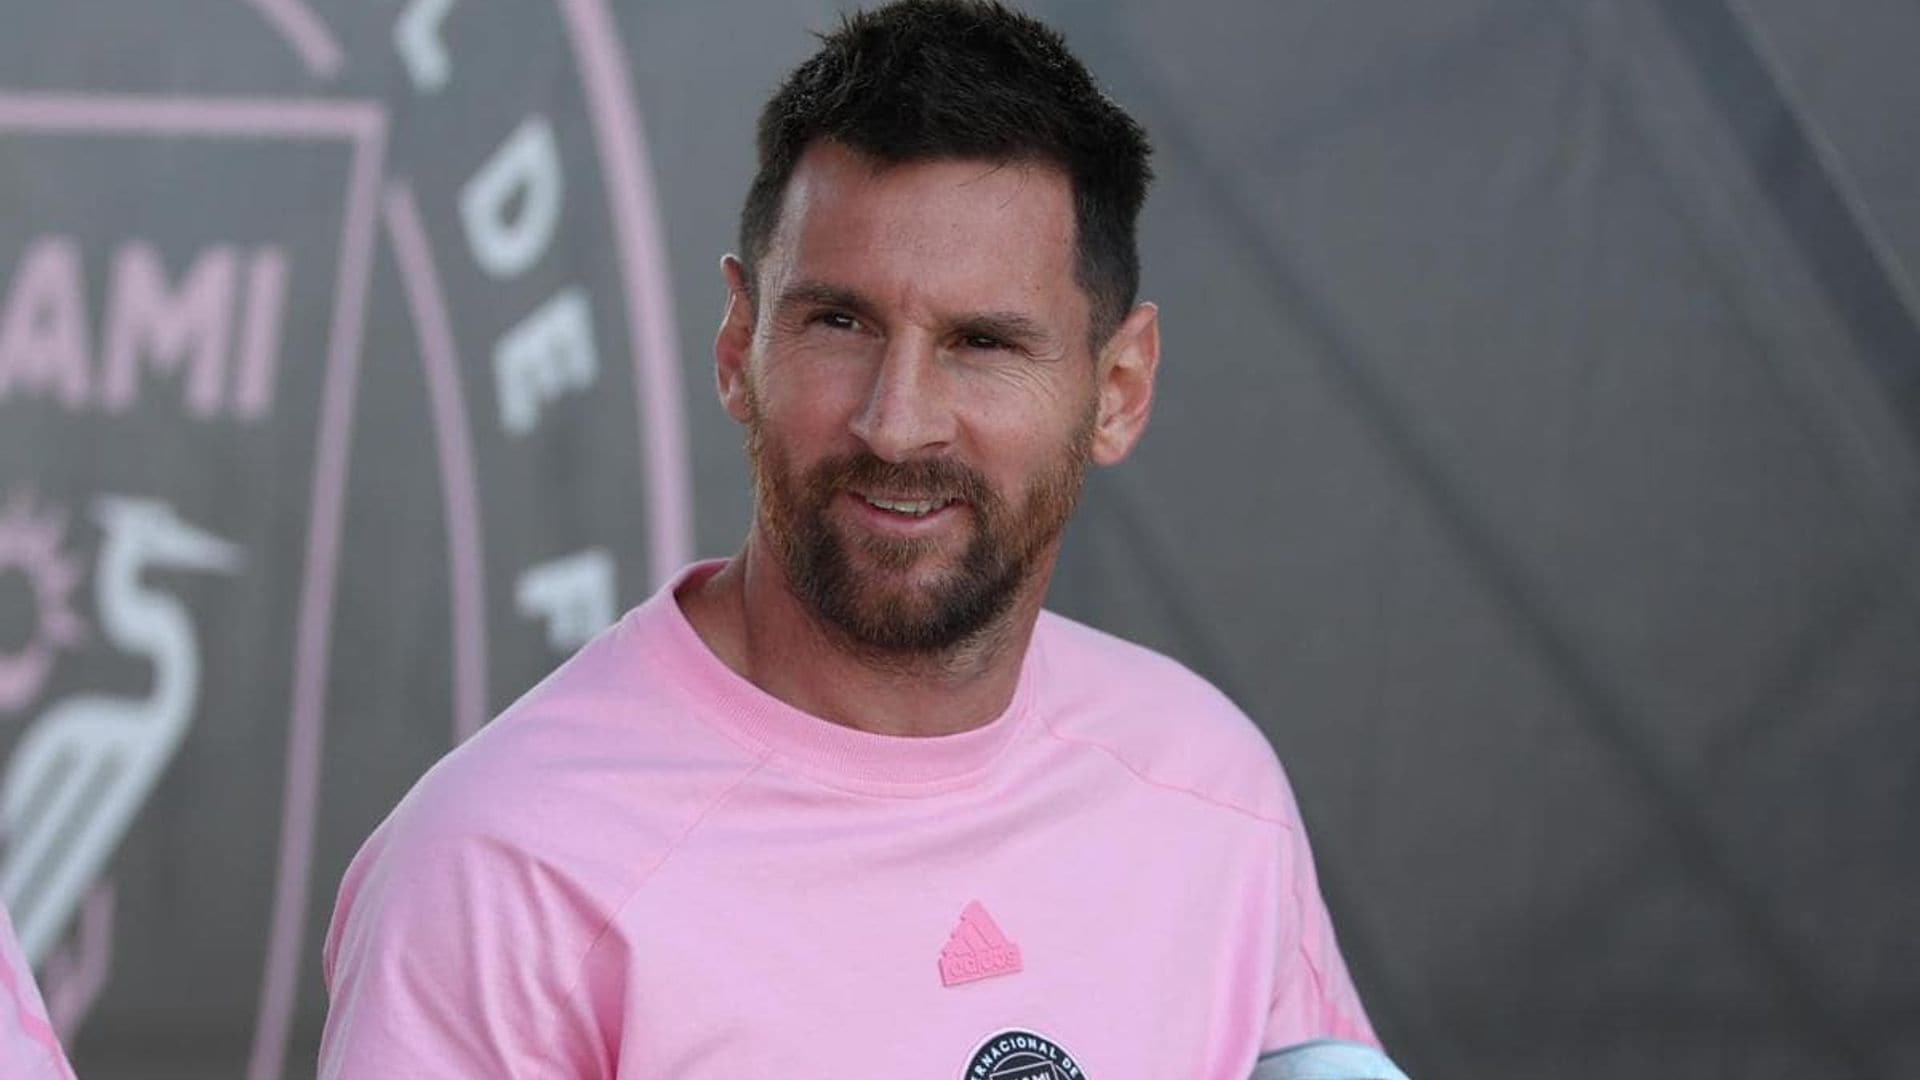 Lionel Messi discusses imminent retirement: ‘I’m conscious that there’s less time’